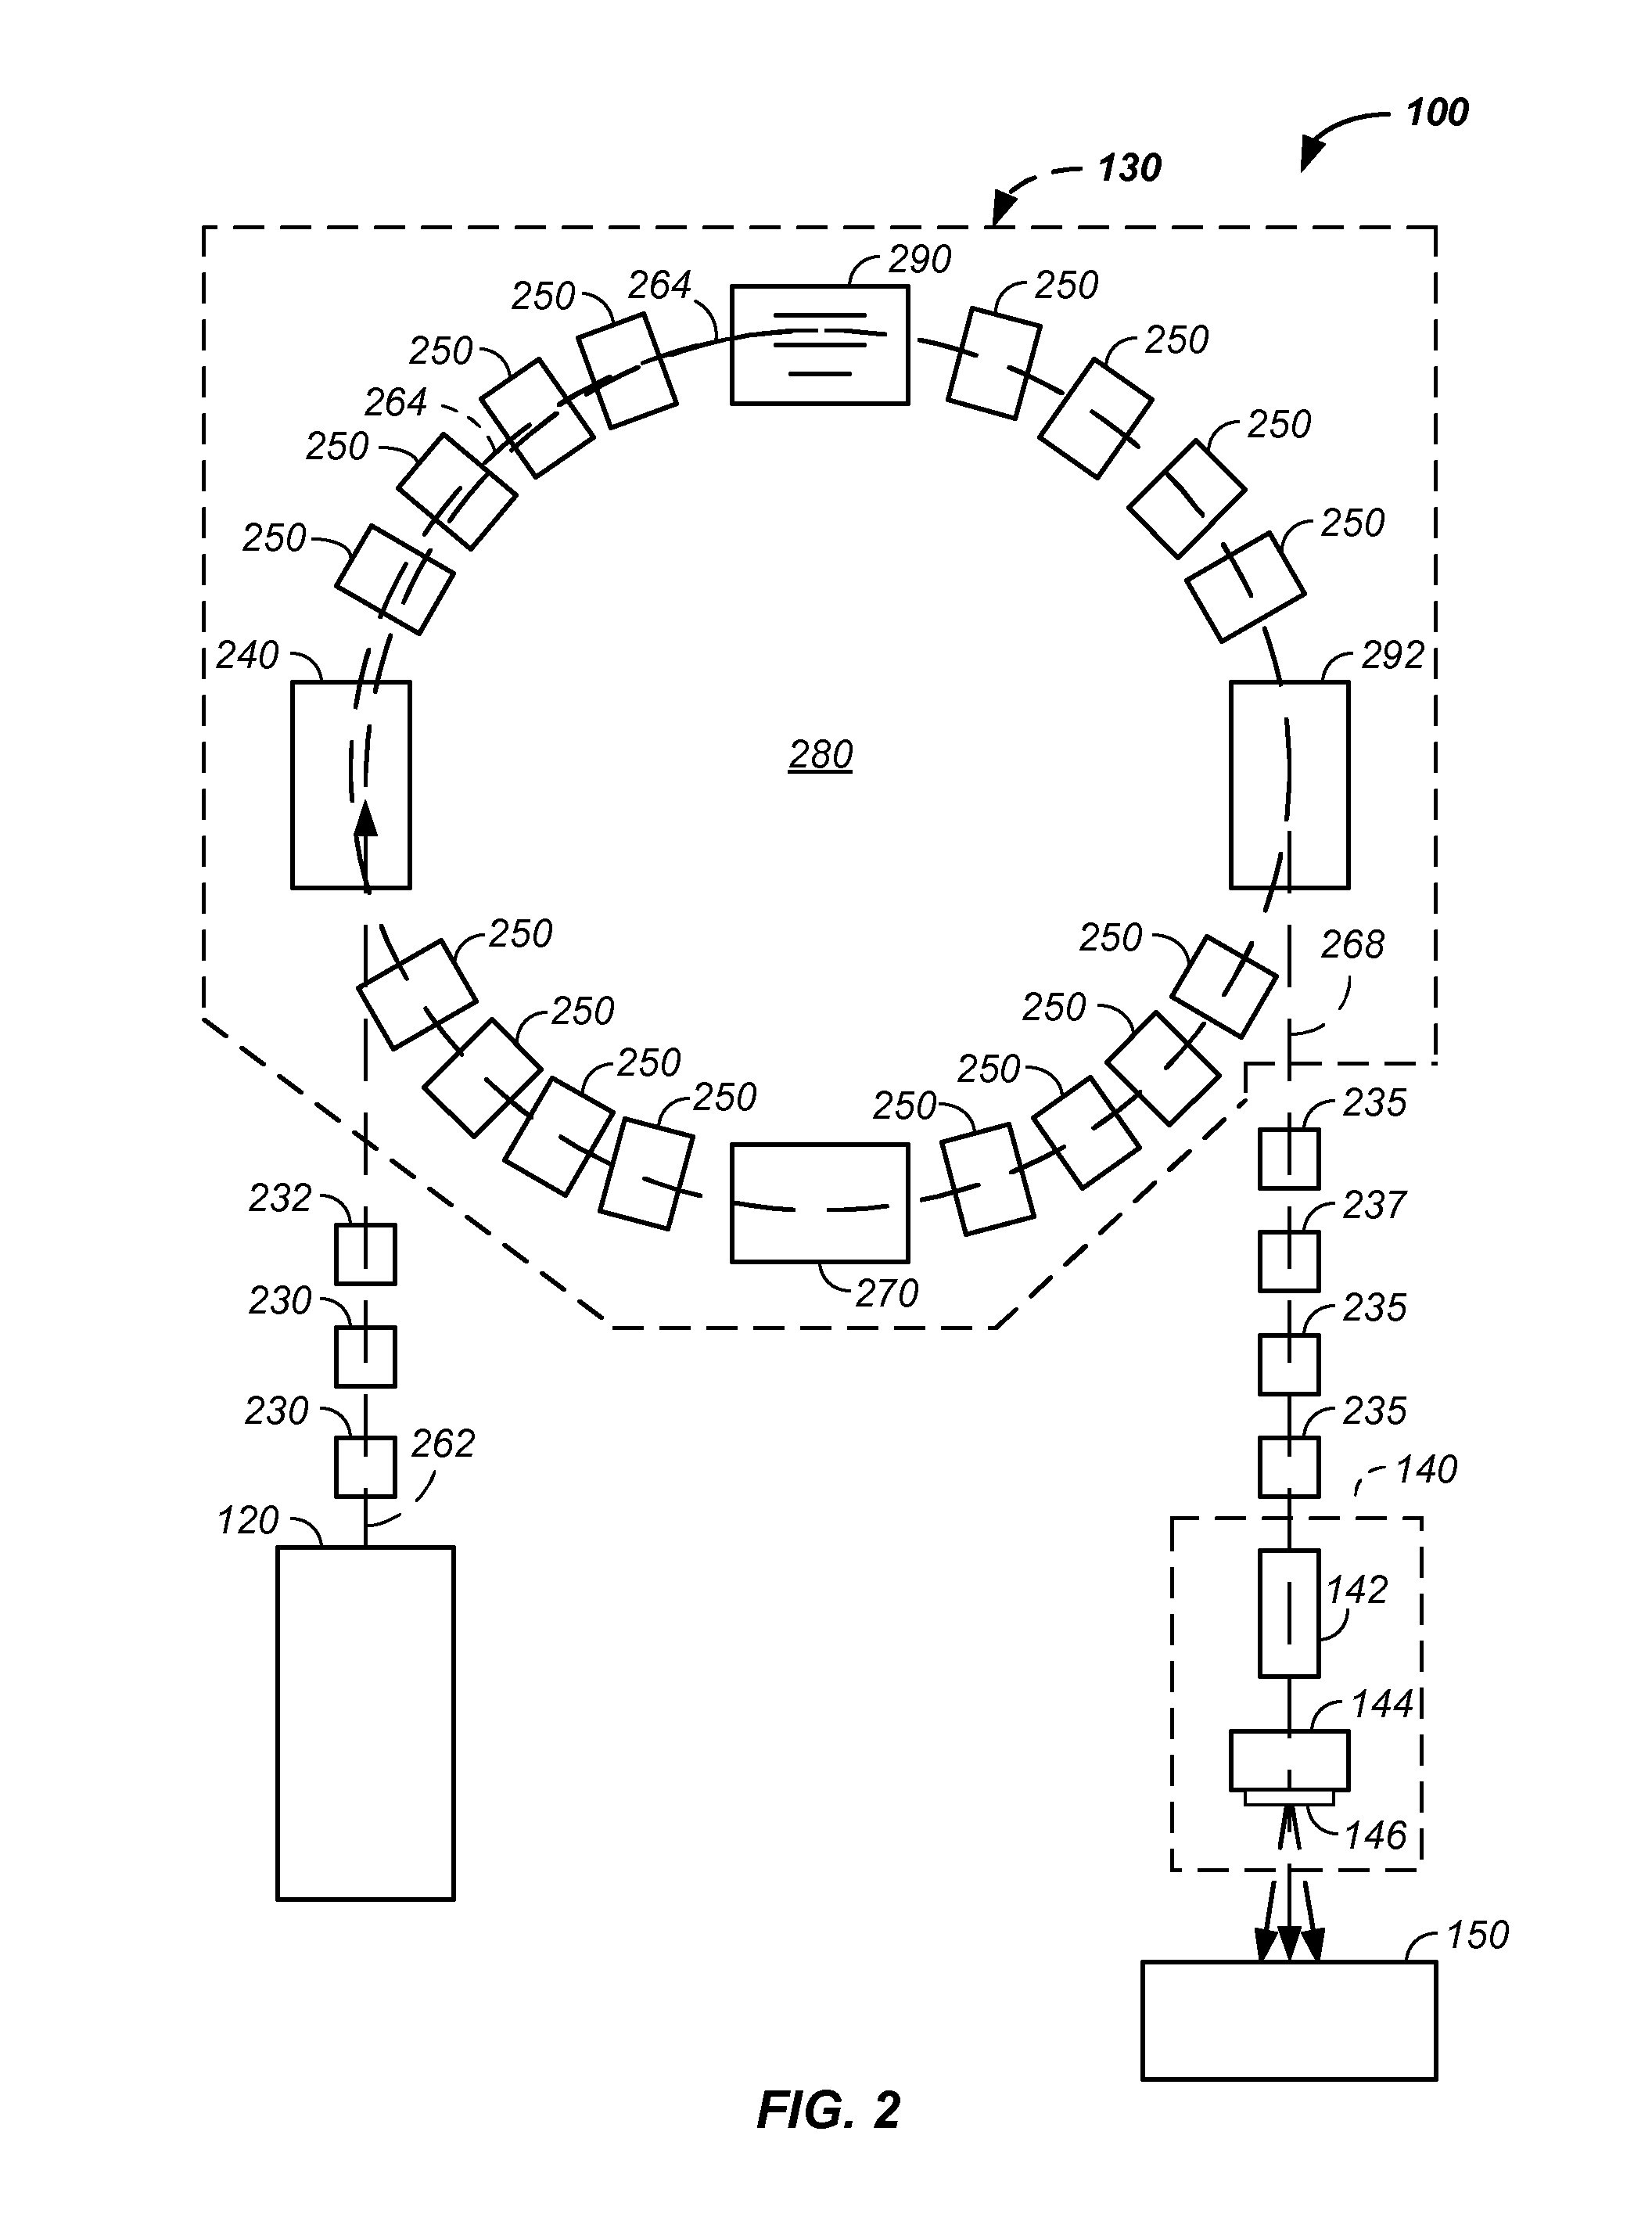 Synchronized x-ray / breathing method and apparatus used in conjunction with a charged particle cancer therapy system